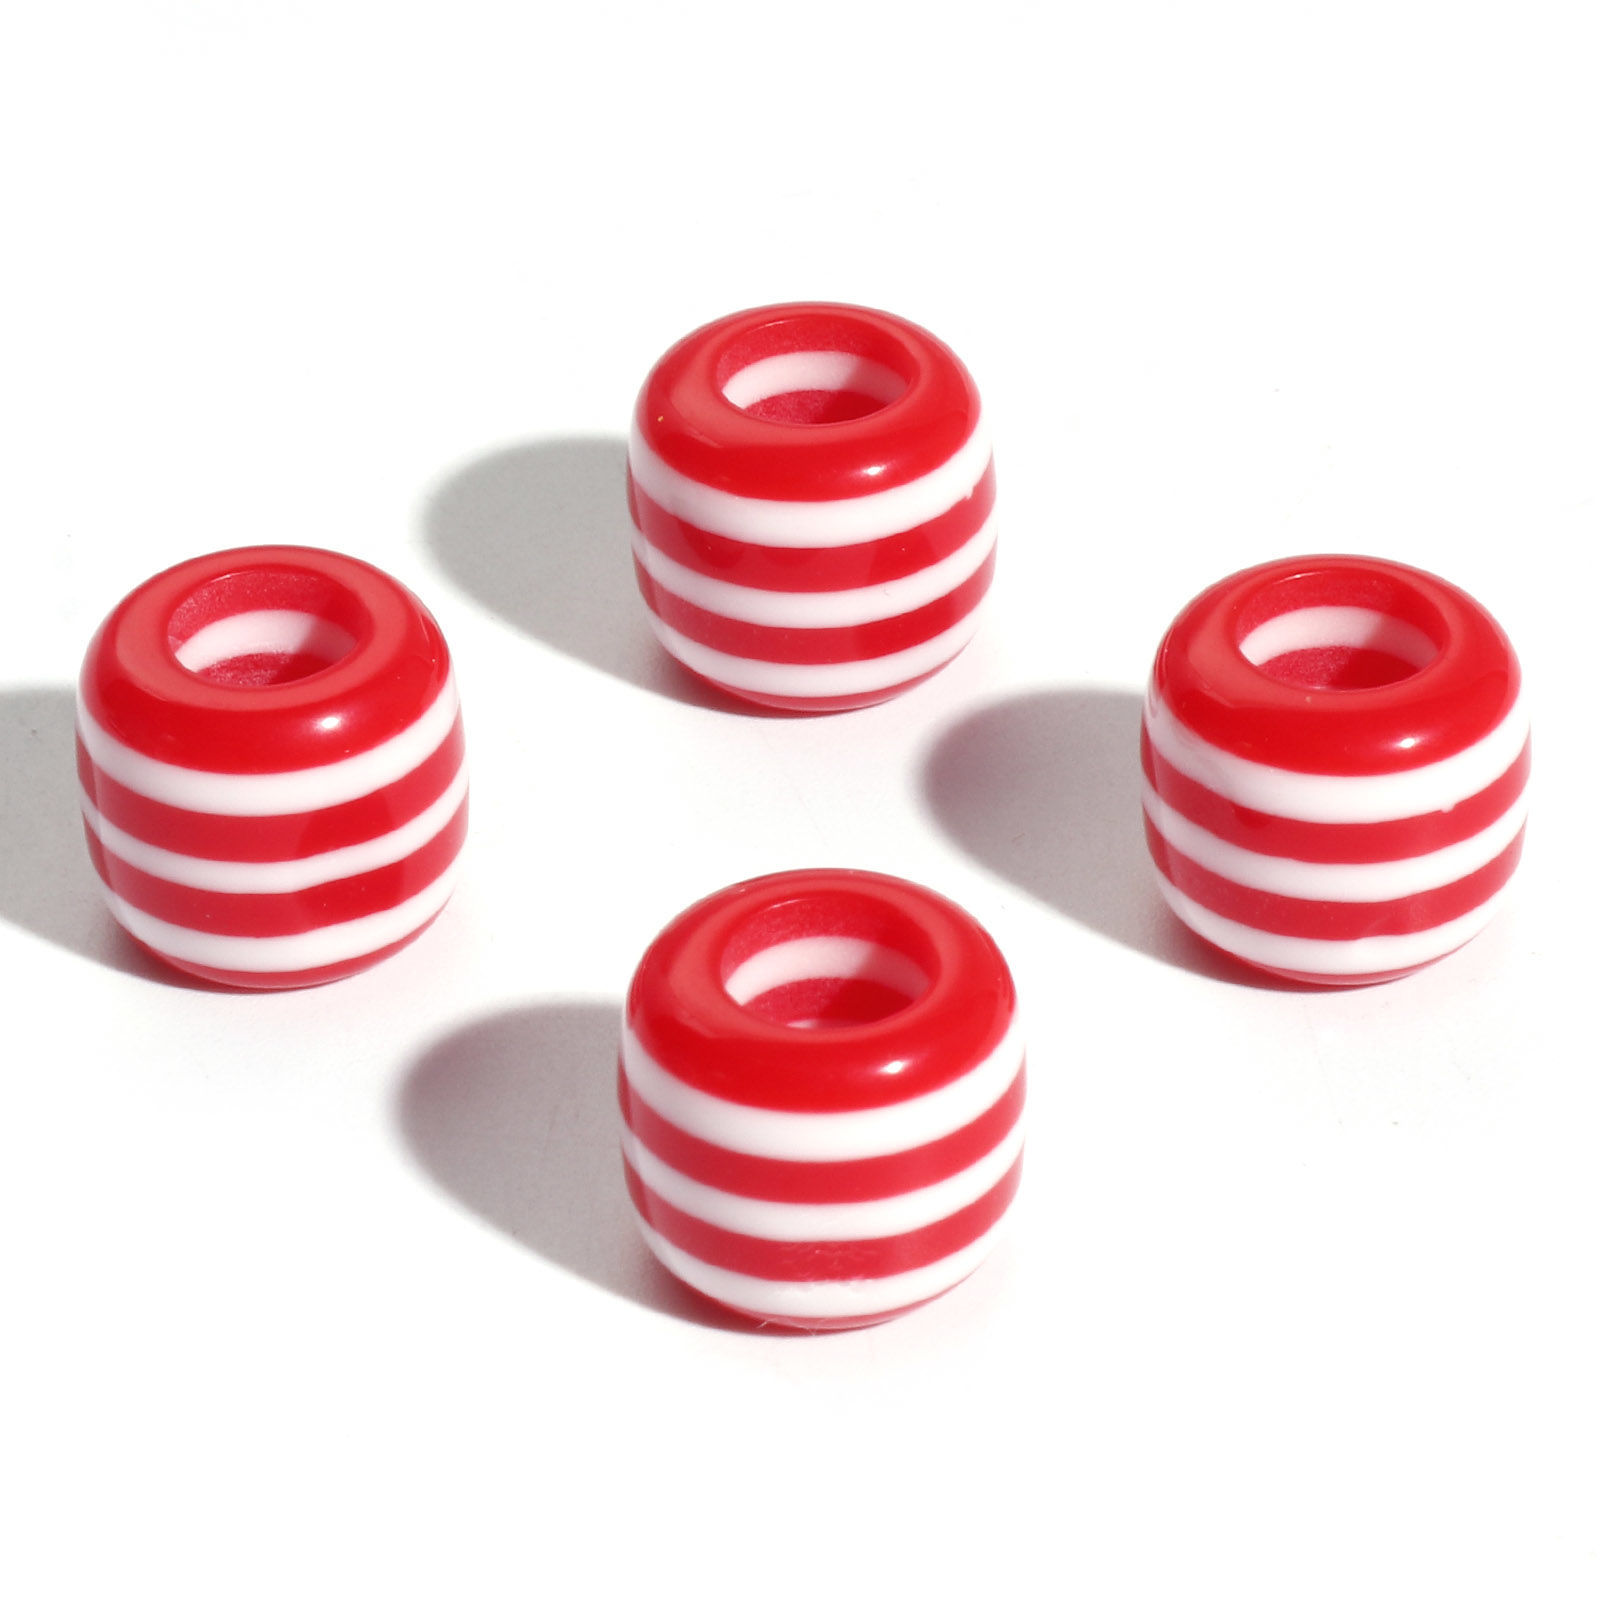 Picture of Resin European Style Large Hole Charm Beads Red Drum Stripe 12mm x 10mm, Hole: Approx 5.8mm, 20 PCs